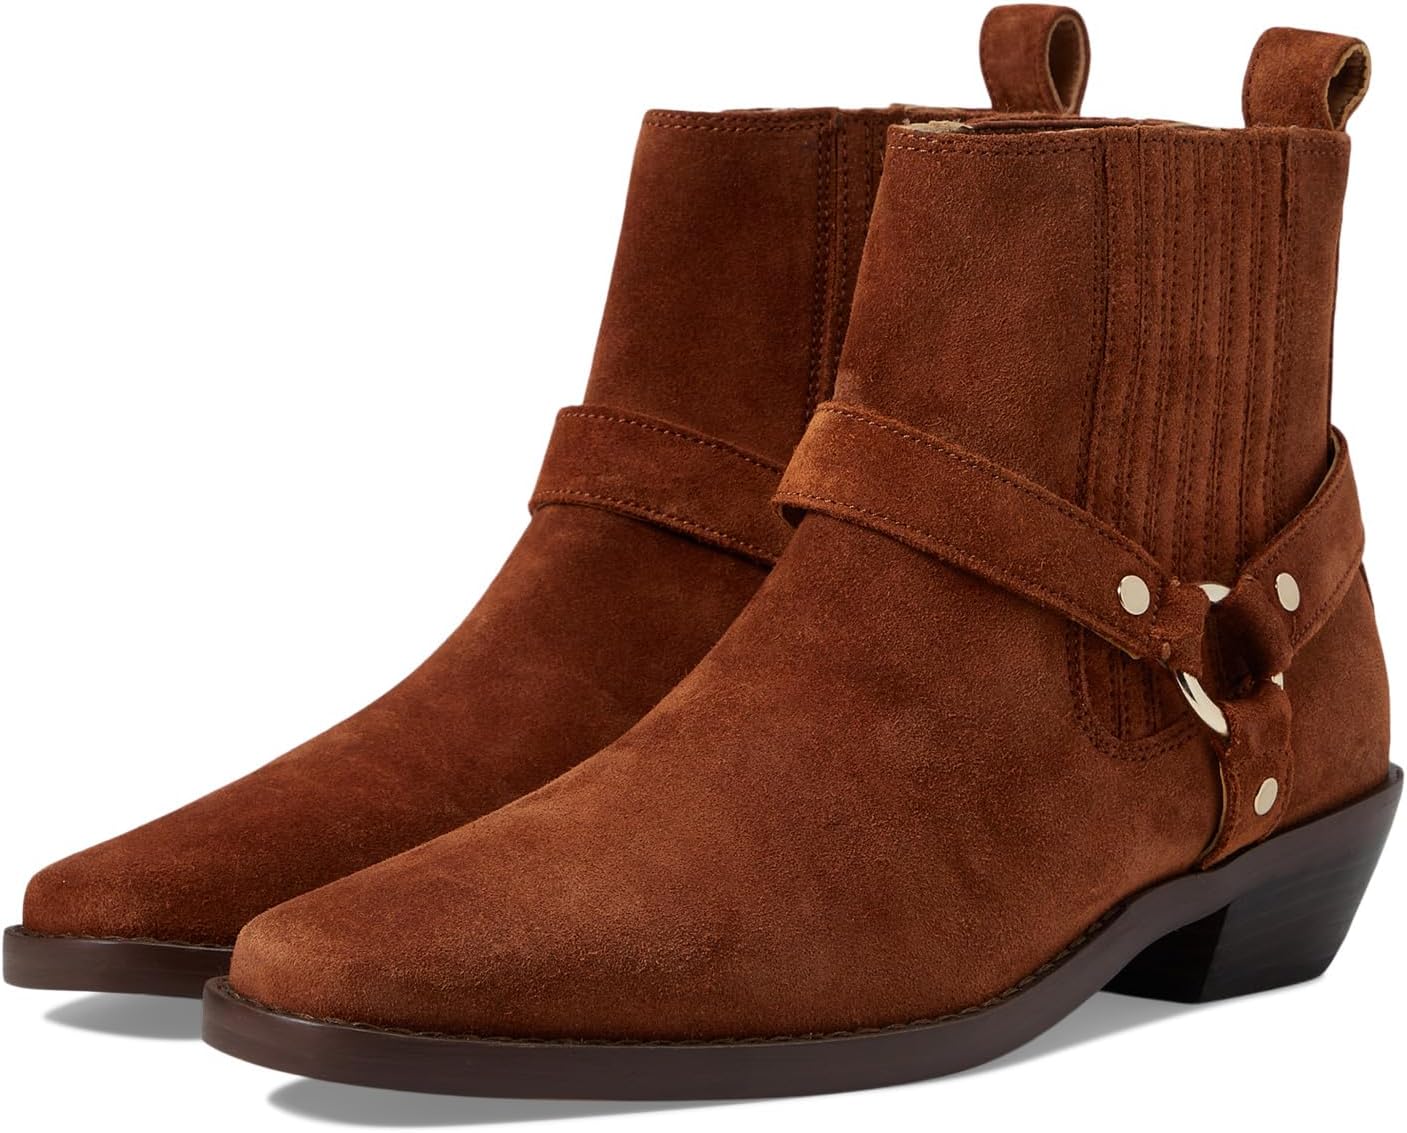 Ботильоны The Santiago Western Ankle Boot in Suede Madewell, цвет Dried Maple